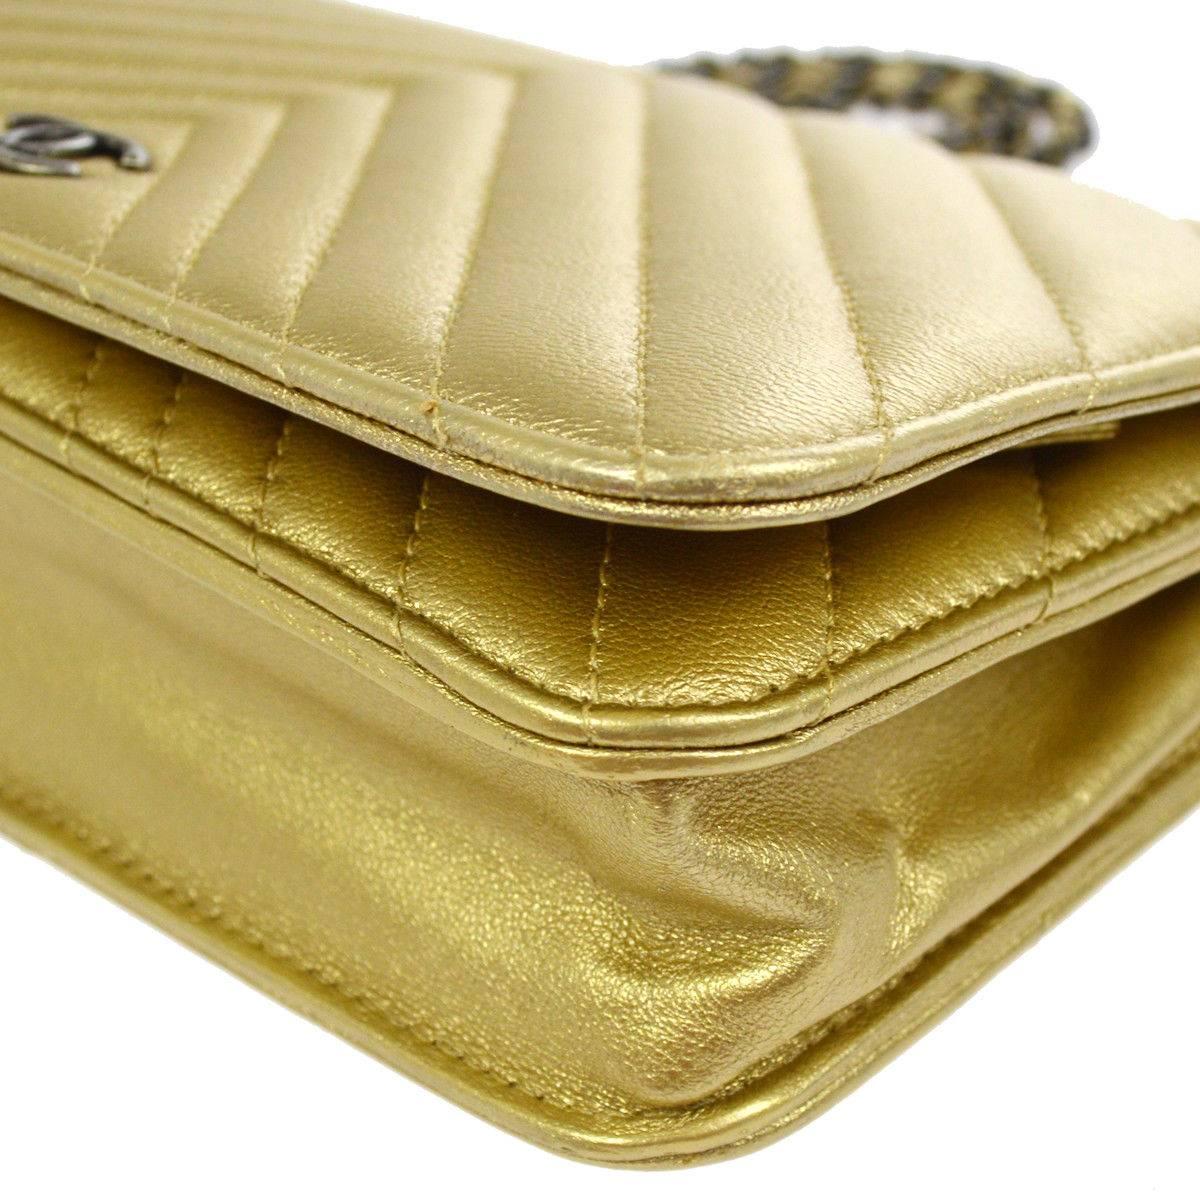 Chanel Gold Leather Chevron Wallet on Chain Clutch Evening Shoulder Flap Bag 2